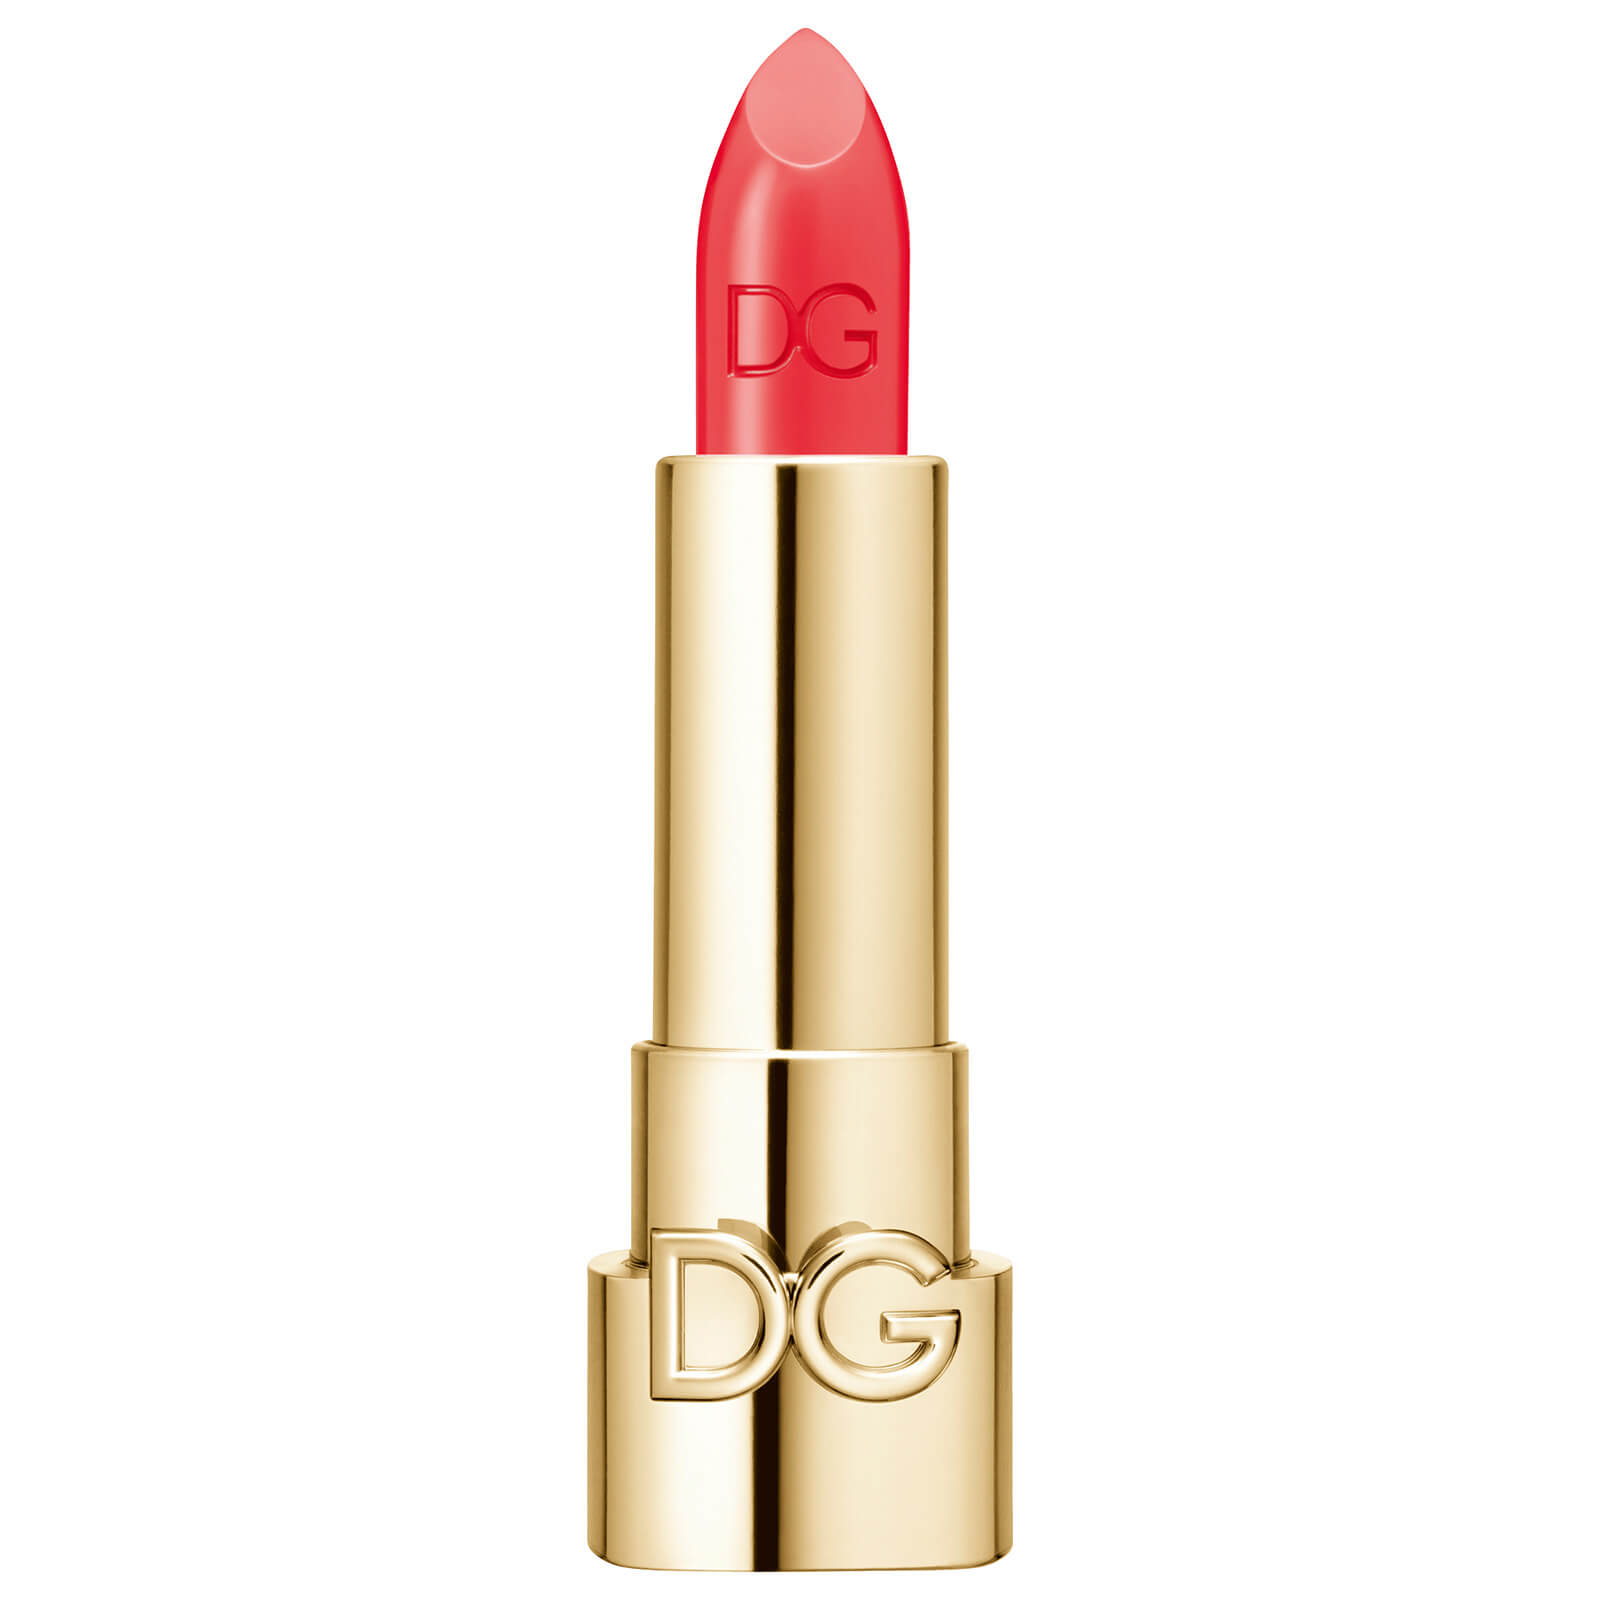 Dolce&Gabbana The Only One Lipstick 1.7g (No Cap) (Various Shades) - 420 Coral Sunset